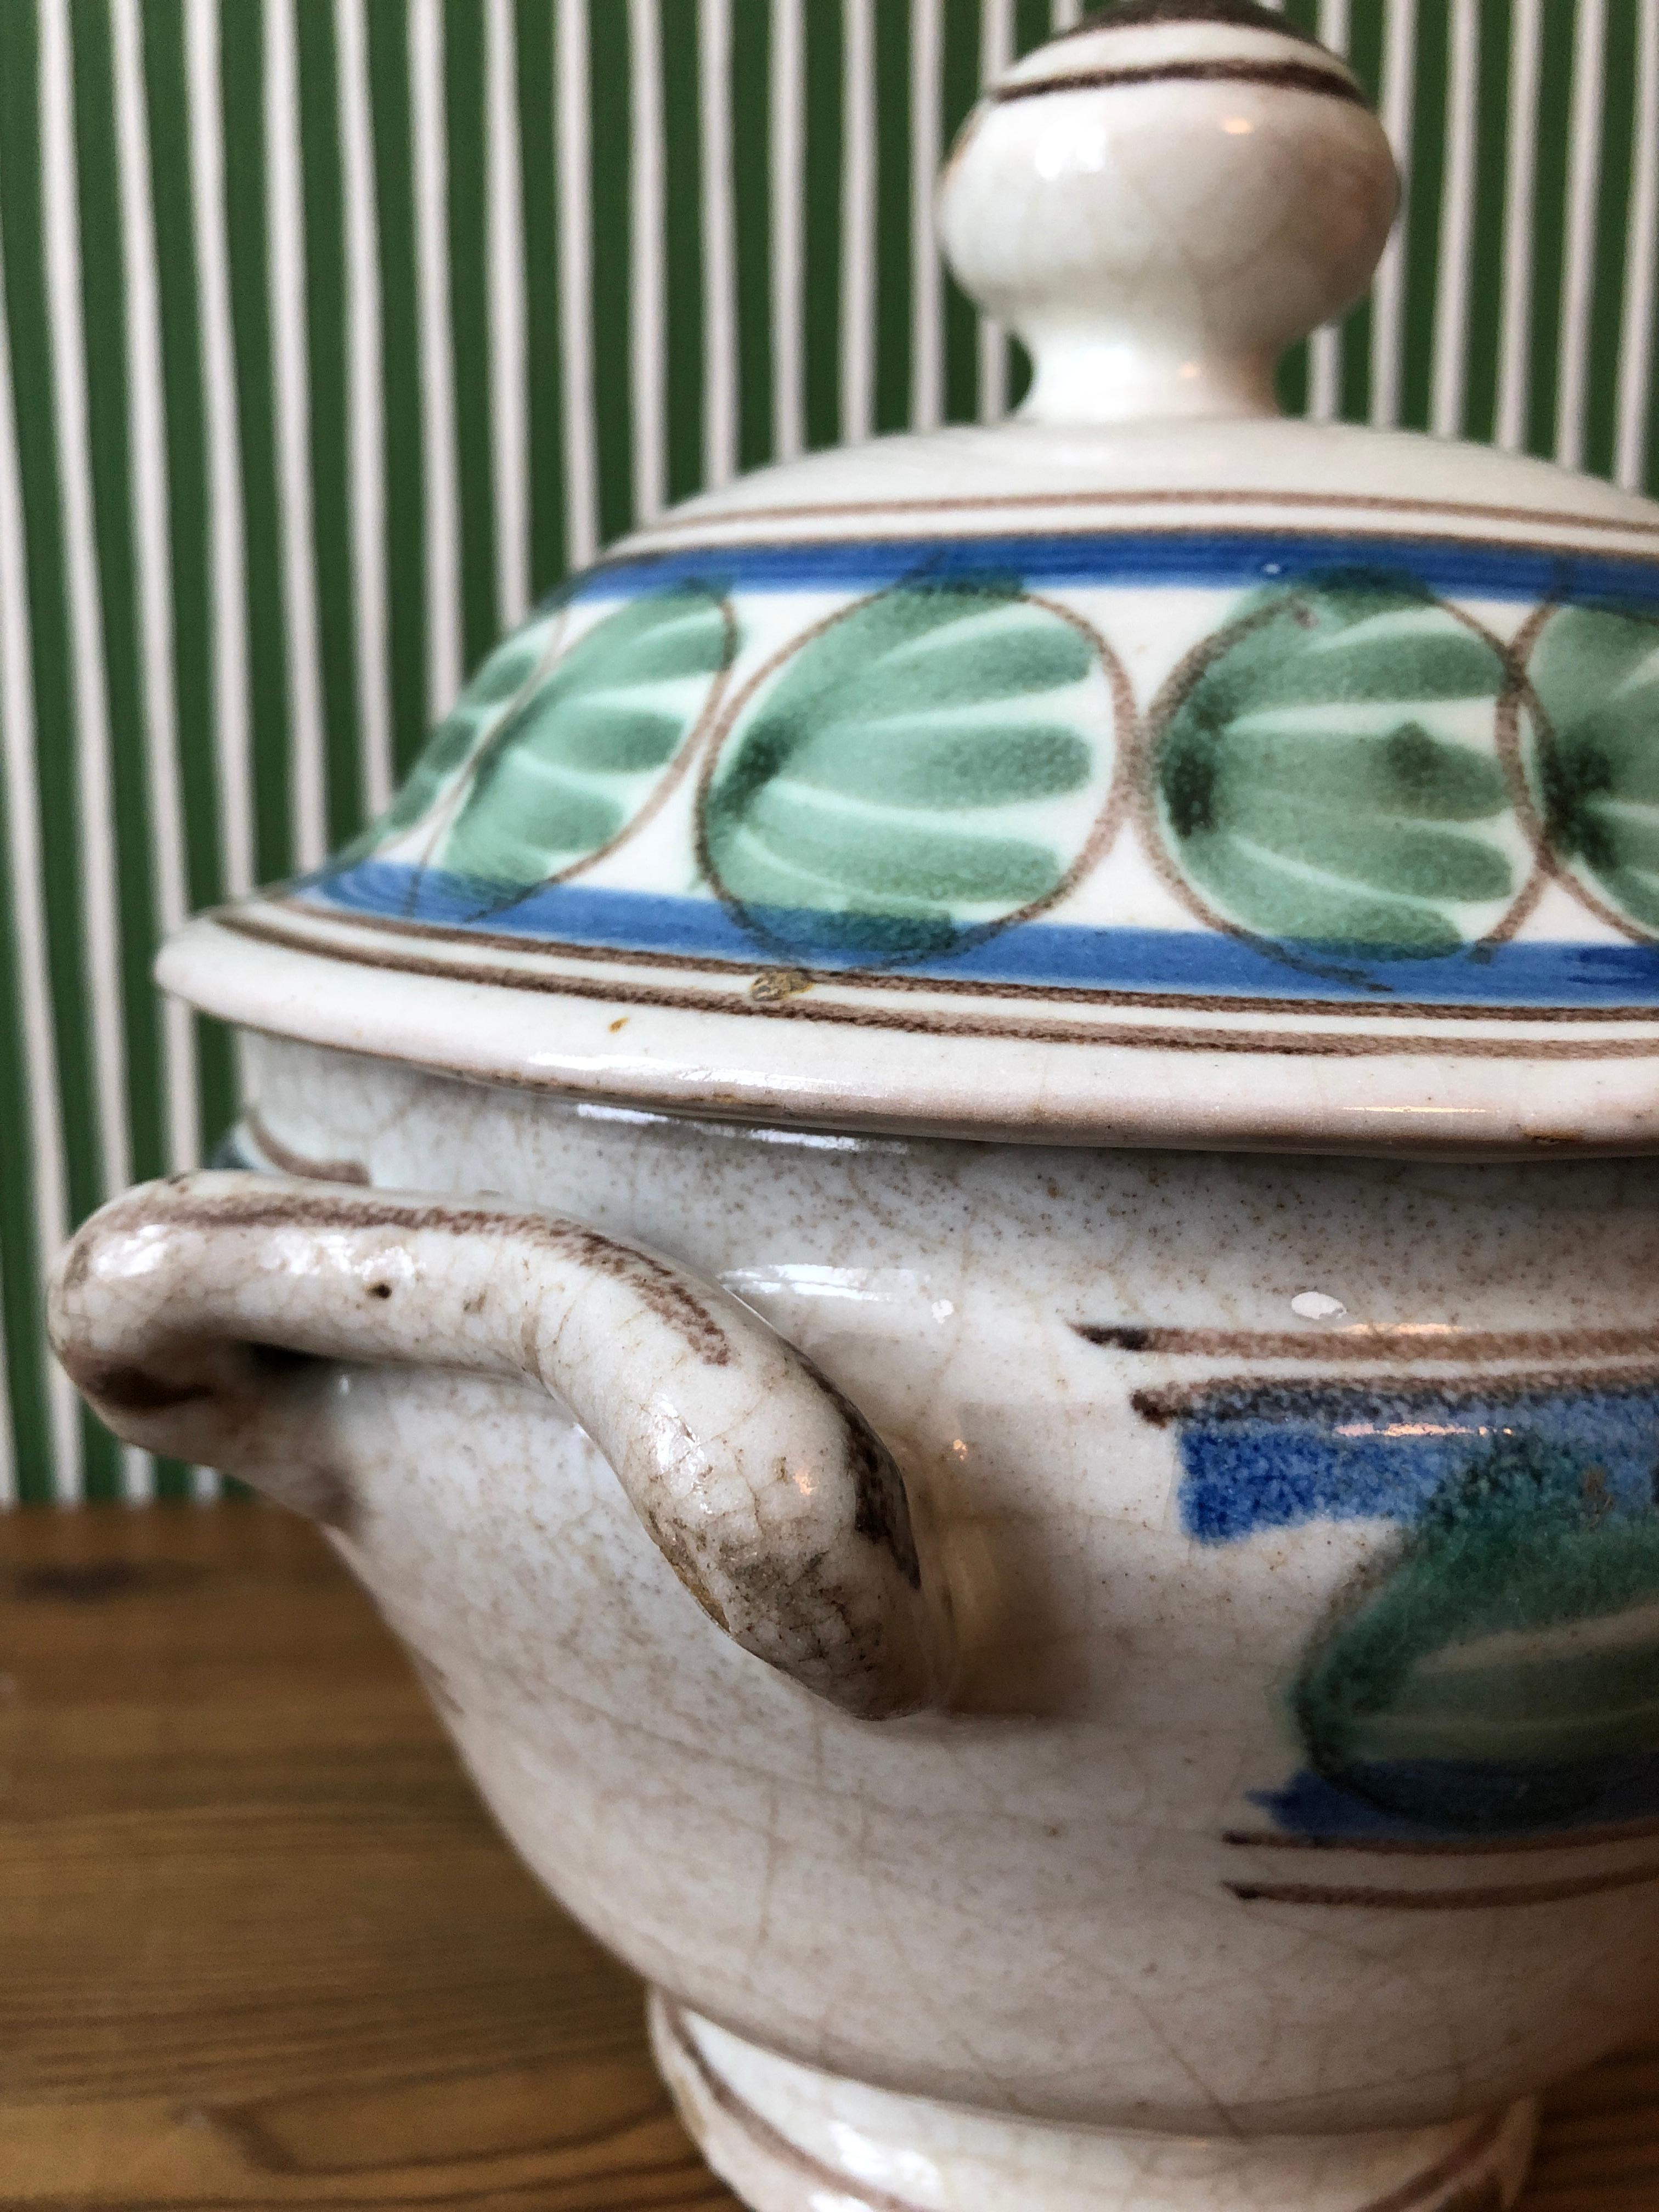 Vintage Vietri Ceramic Tureen with Blue and Green Glace, Italy Late 19th Century 4